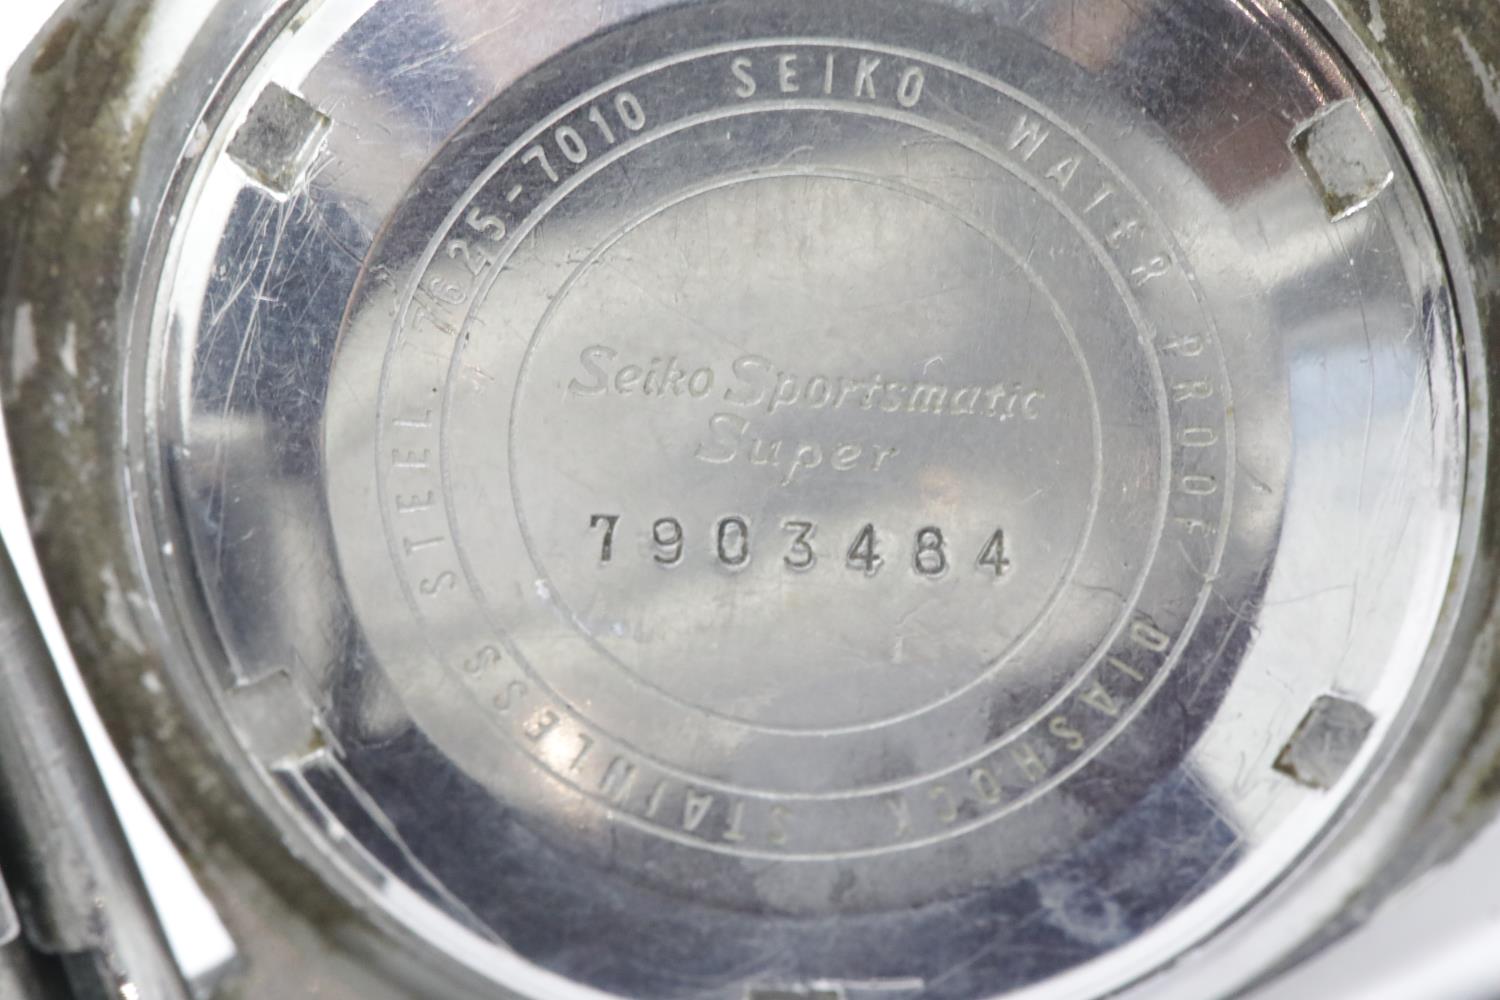 Seiko Sportsmatic Super automatic wristwatch. P&P Group 1 (£14+VAT for the first lot and £1+VAT - Image 5 of 5